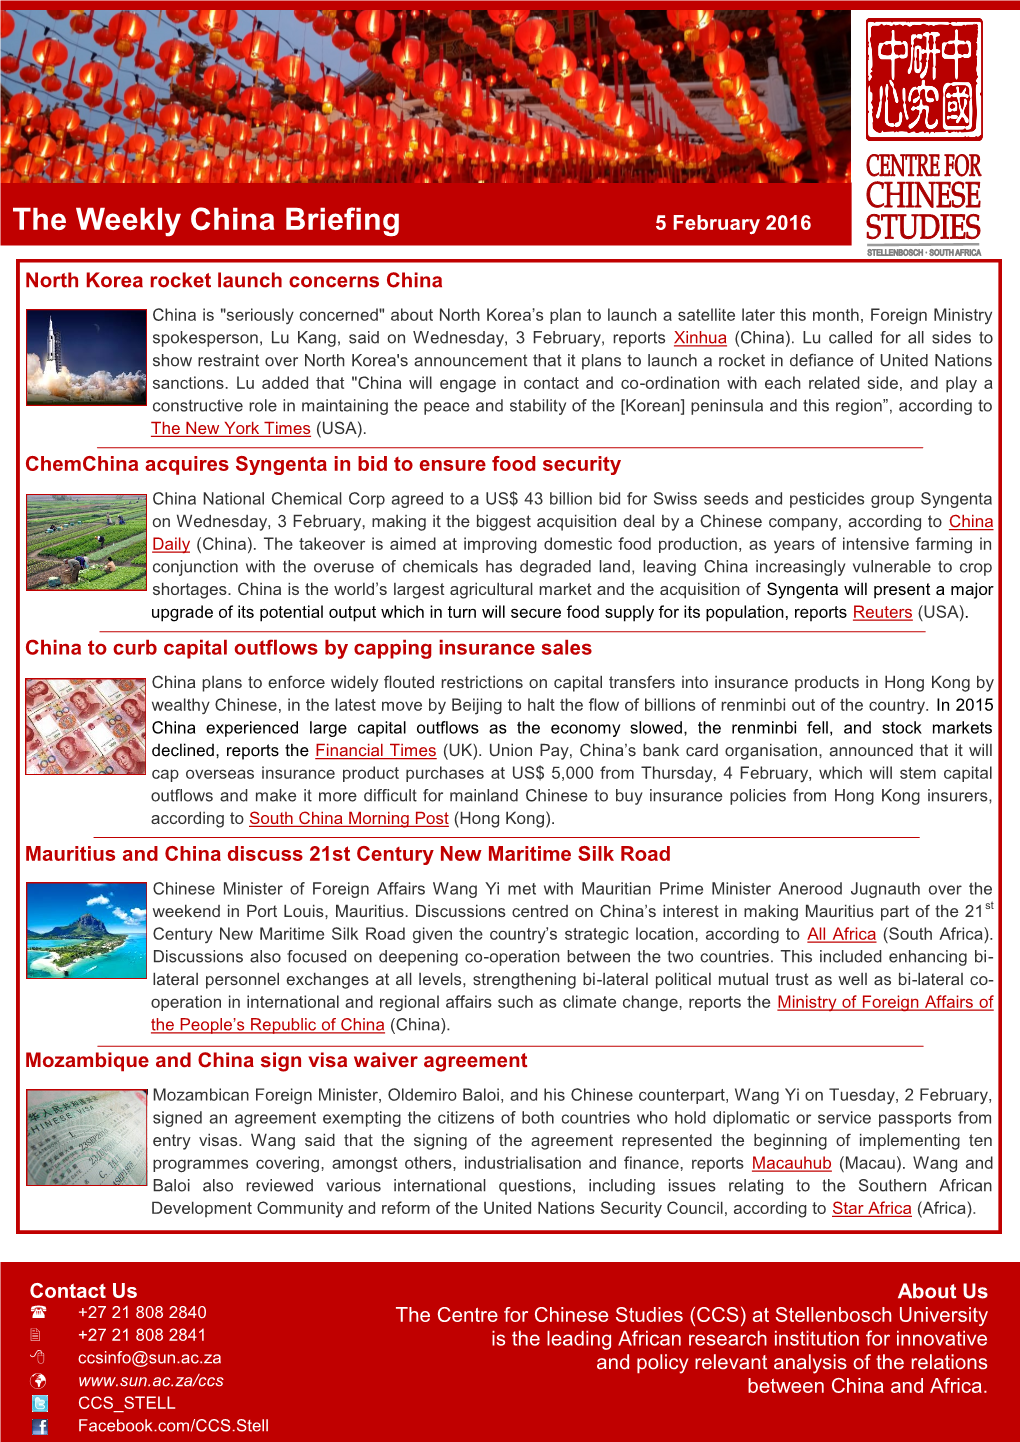 The Weekly China Briefing 5 February 2016